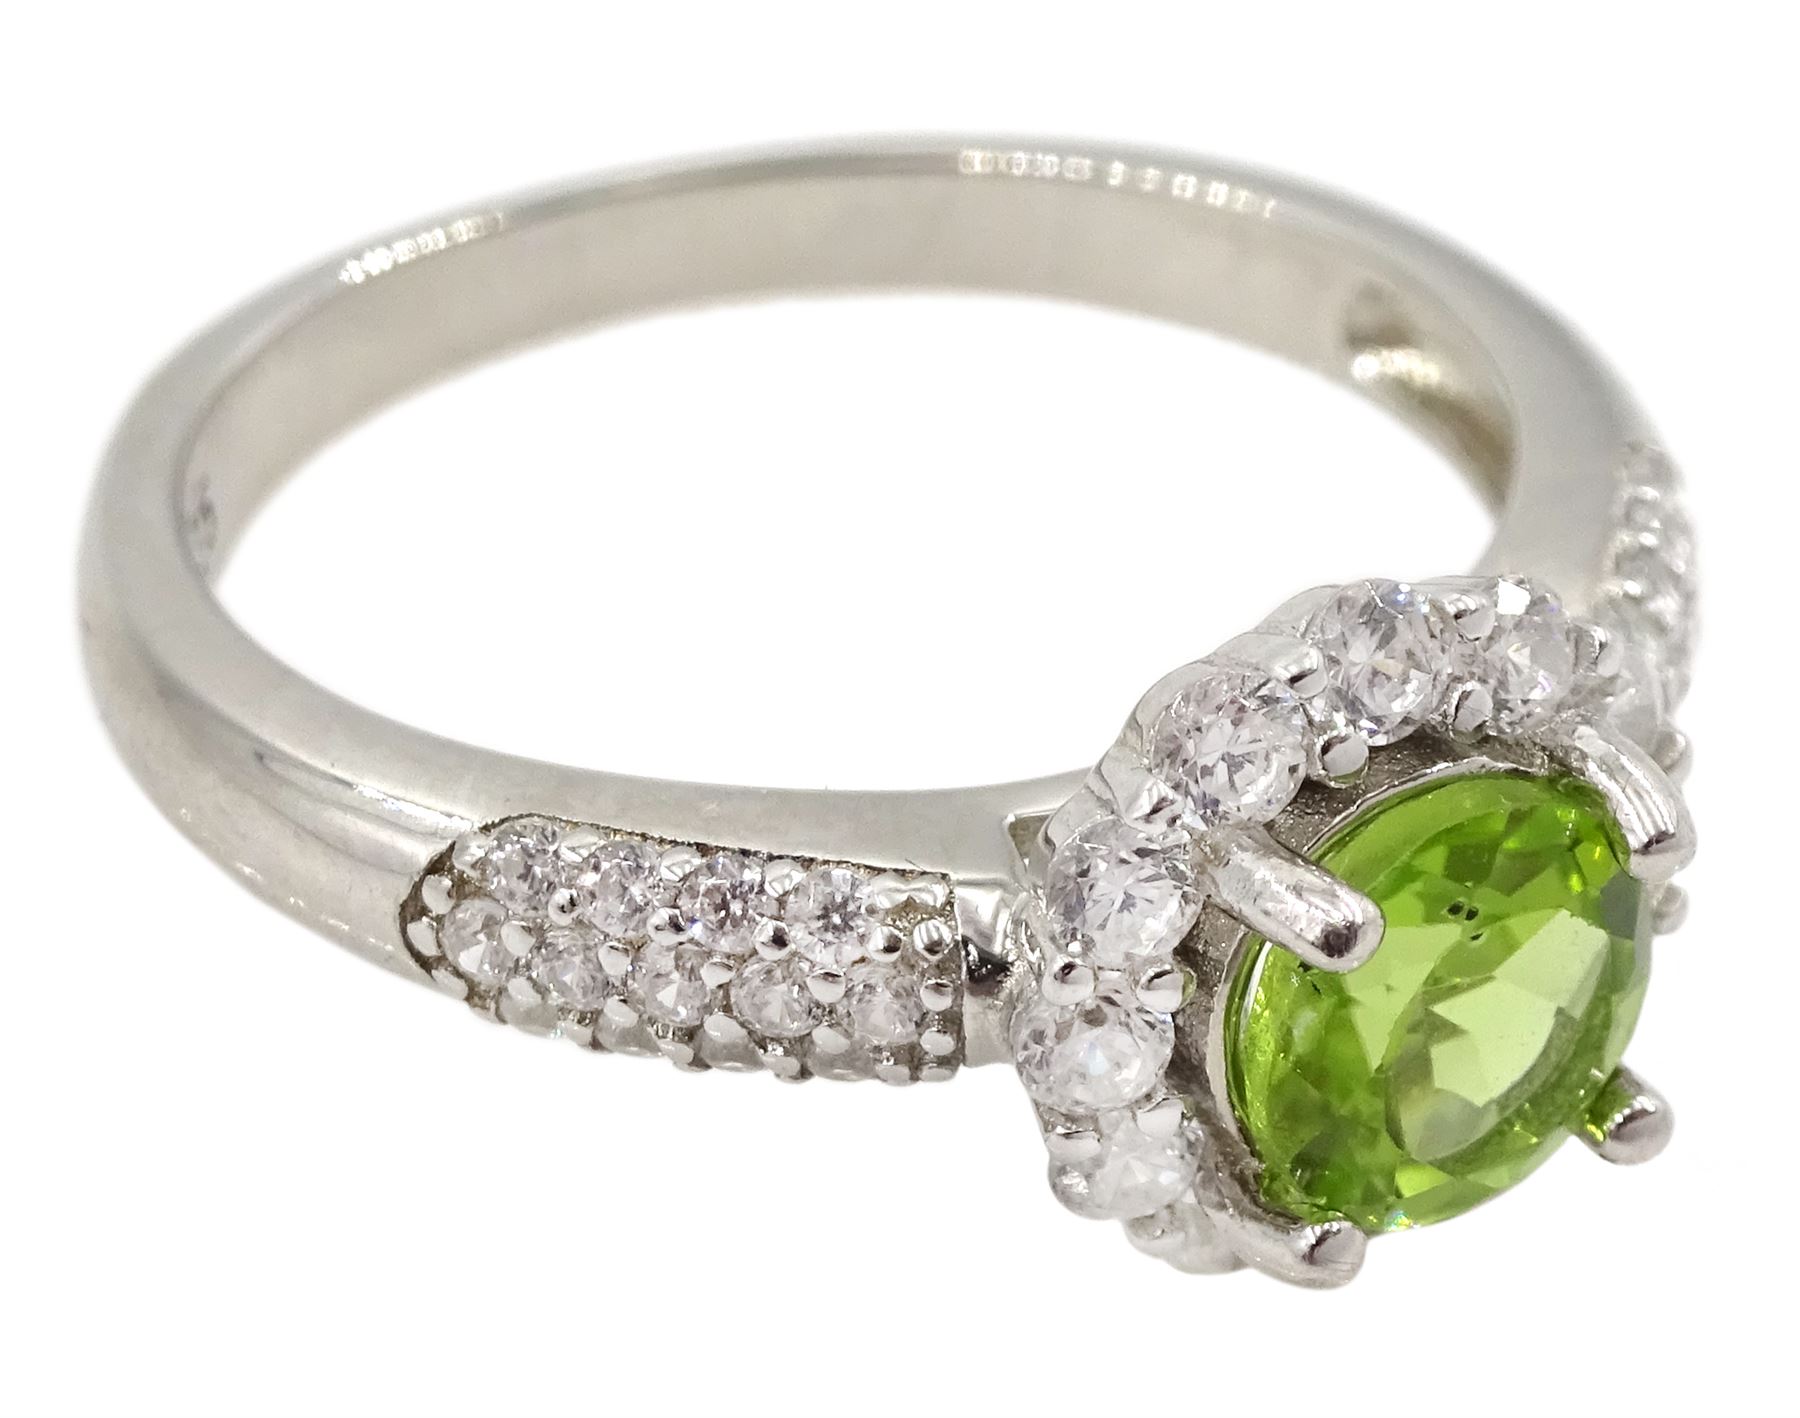 Silver peridot and cubic zirconia cluster ring - Image 3 of 4